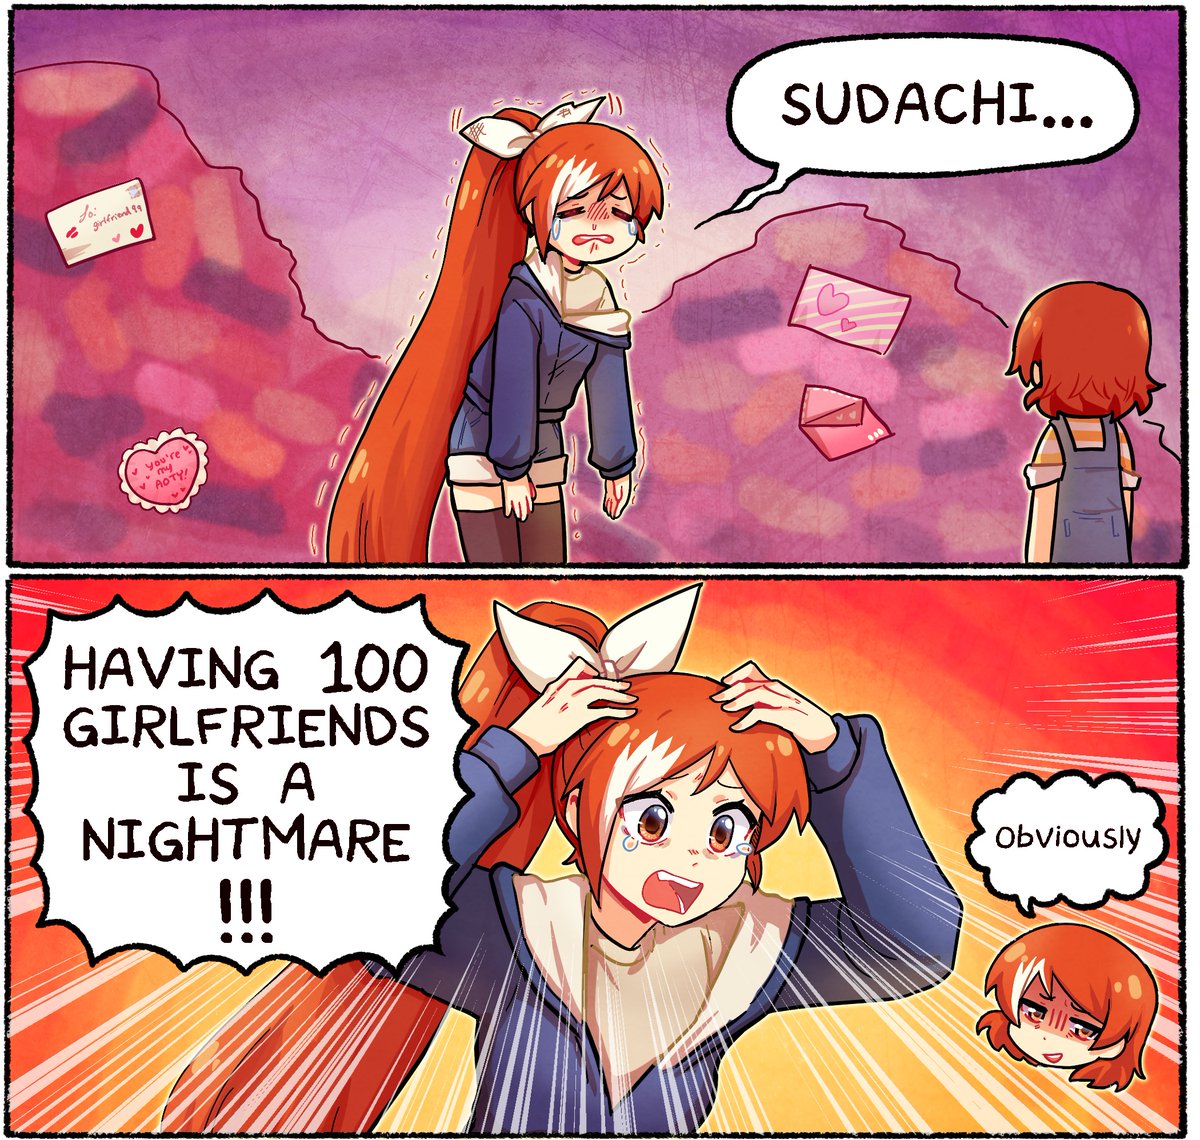 In this week's The Daily Life of Crunchyroll-Hime (by @coughdrops) 💘✨ Hime realizes love can get complicated quickly 😅